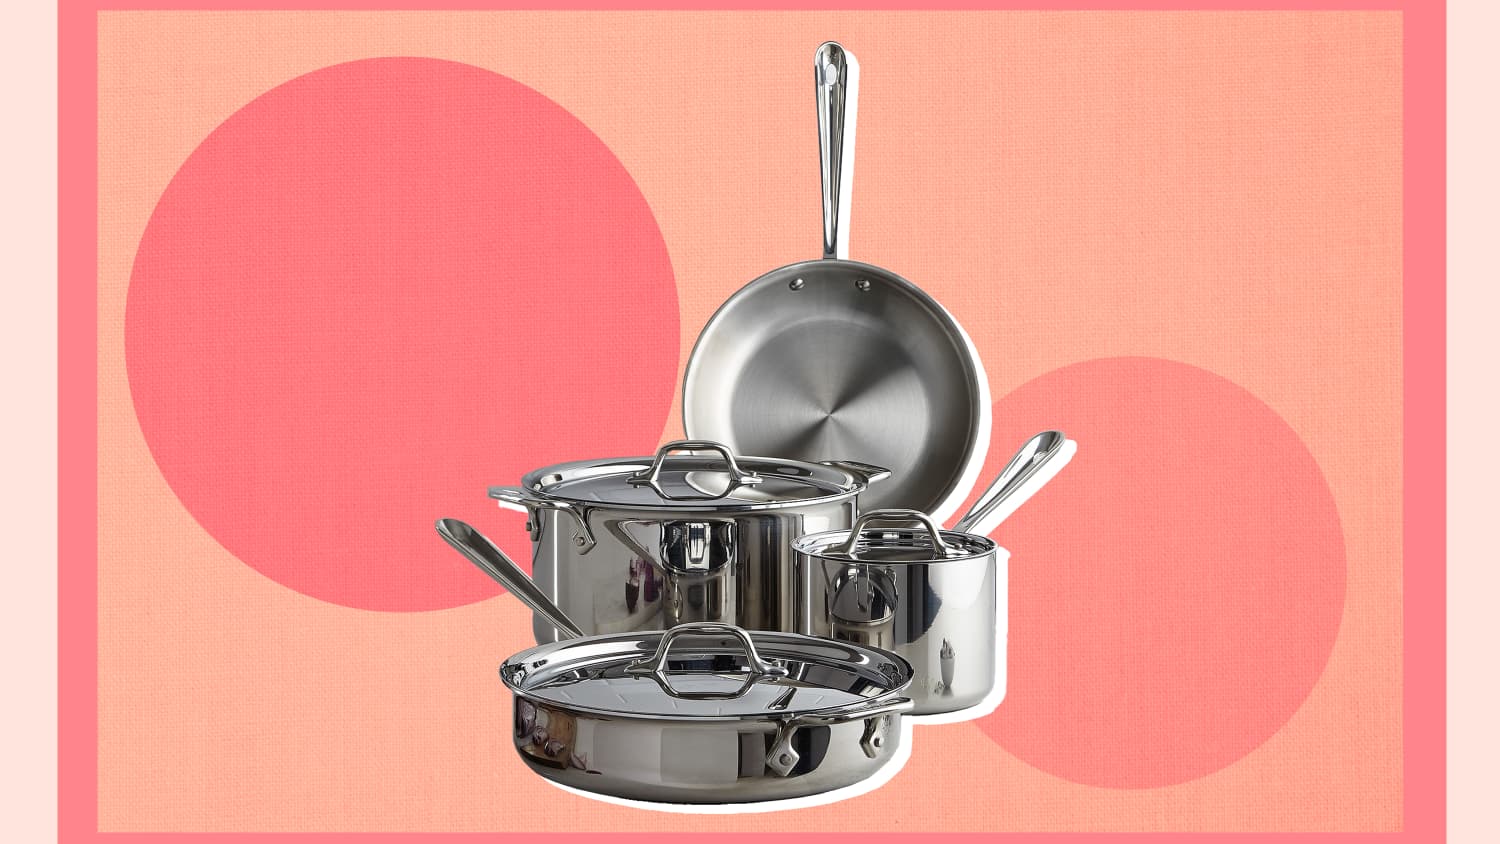 All-Clad cookware: Get a gorgeous 7-piece set for 64% off